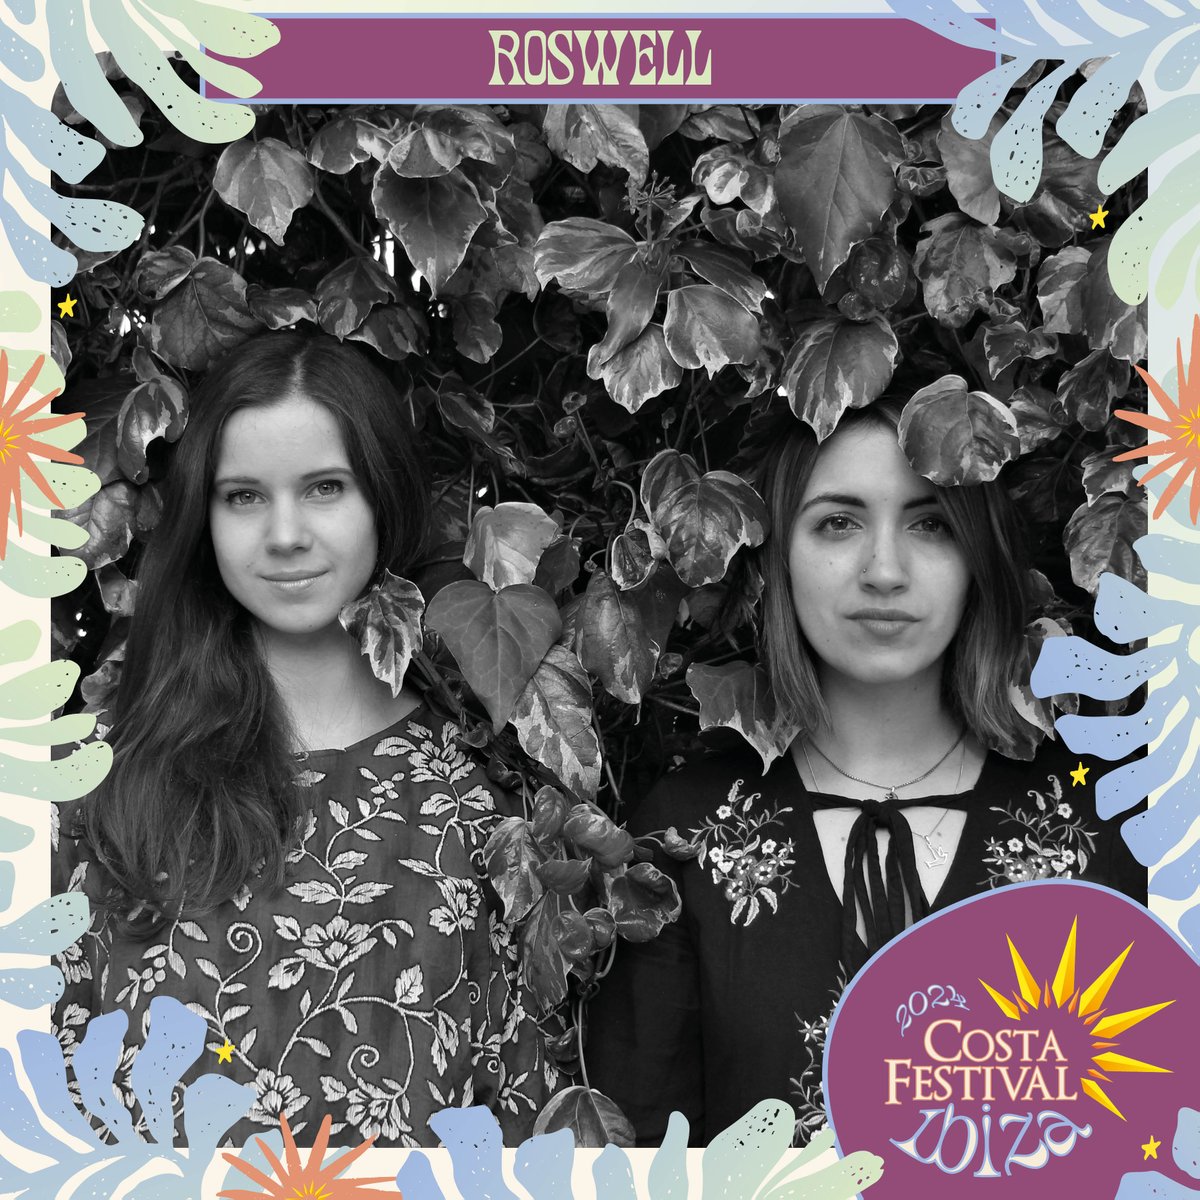 If you like your folk music to make you feel like you’ve stepped into another world, somewhere magical then you will love Roswell-band. Check out their new single to find out what you have to look forward to when they join us at Costa Ibiza! 🔗roswellband.co.uk/listen